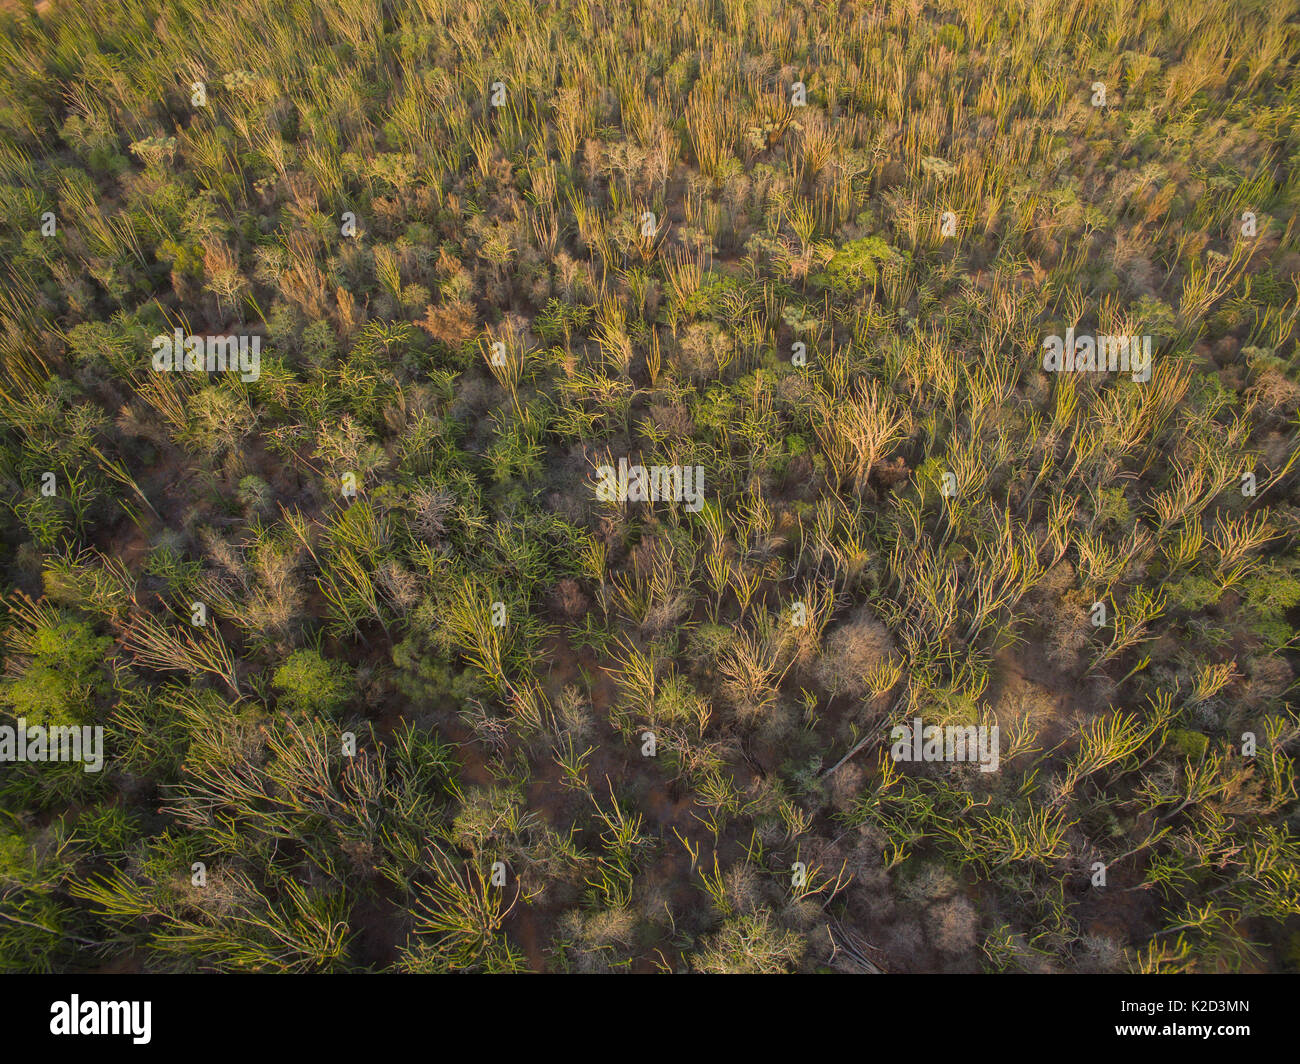 Aerial view of spiny forest with Octopus trees, (Didiera madagascariensis) Berenty, Madagascar, October 2015. Stock Photo